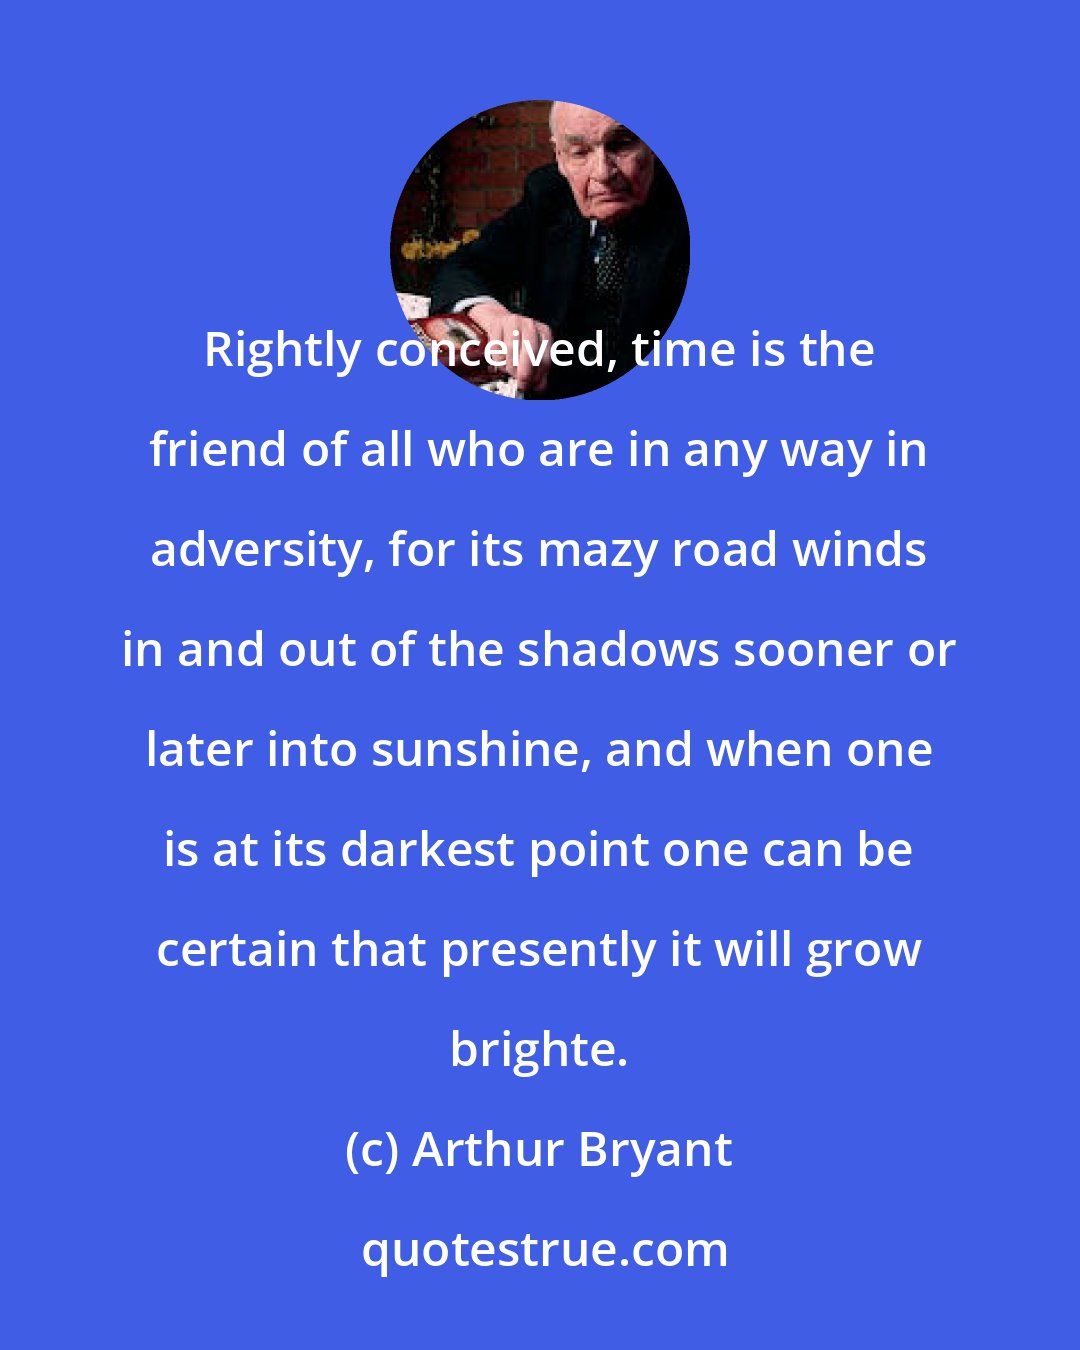 Arthur Bryant: Rightly conceived, time is the friend of all who are in any way in adversity, for its mazy road winds in and out of the shadows sooner or later into sunshine, and when one is at its darkest point one can be certain that presently it will grow brighte.